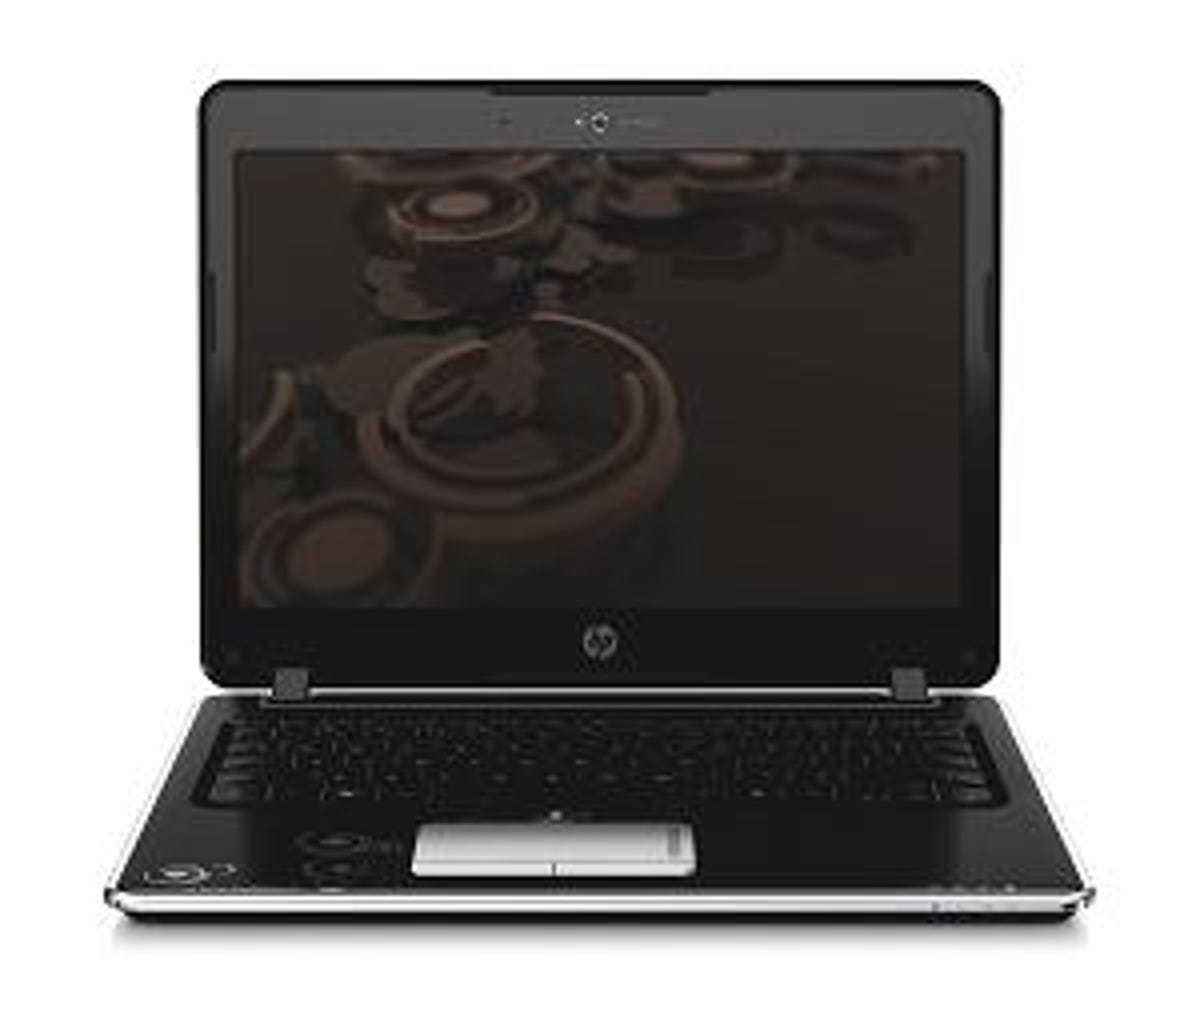 The lightweight HP Pavilion dv2, which uses the AMD Neo processor, is marketed as a notebook